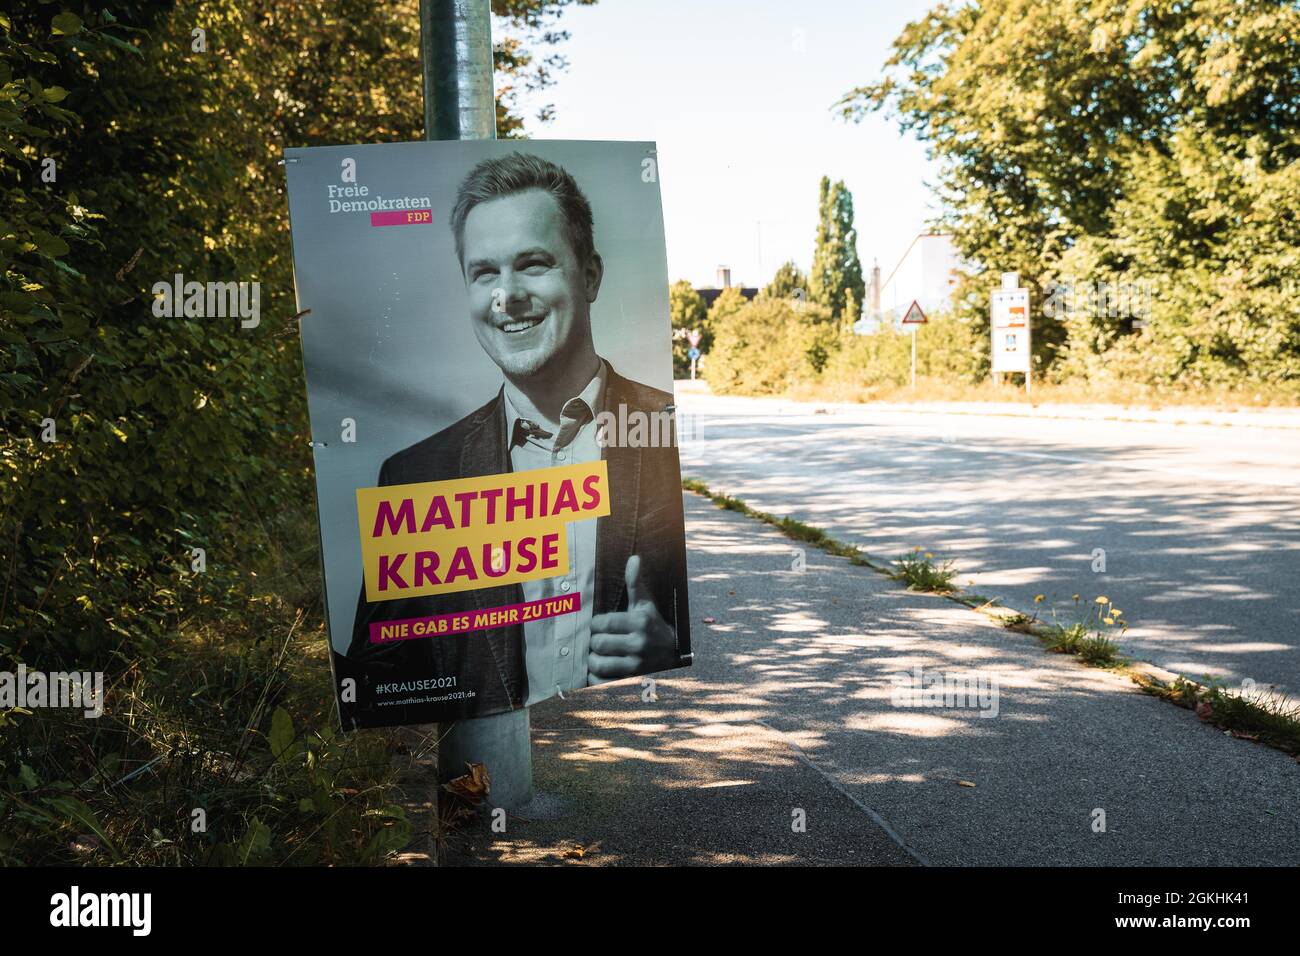 Election Poster For The Federal Election In Germany 2021 Of The FDP Freie Demokratische Partei With Matthias Krause On The Poster Stock Photo